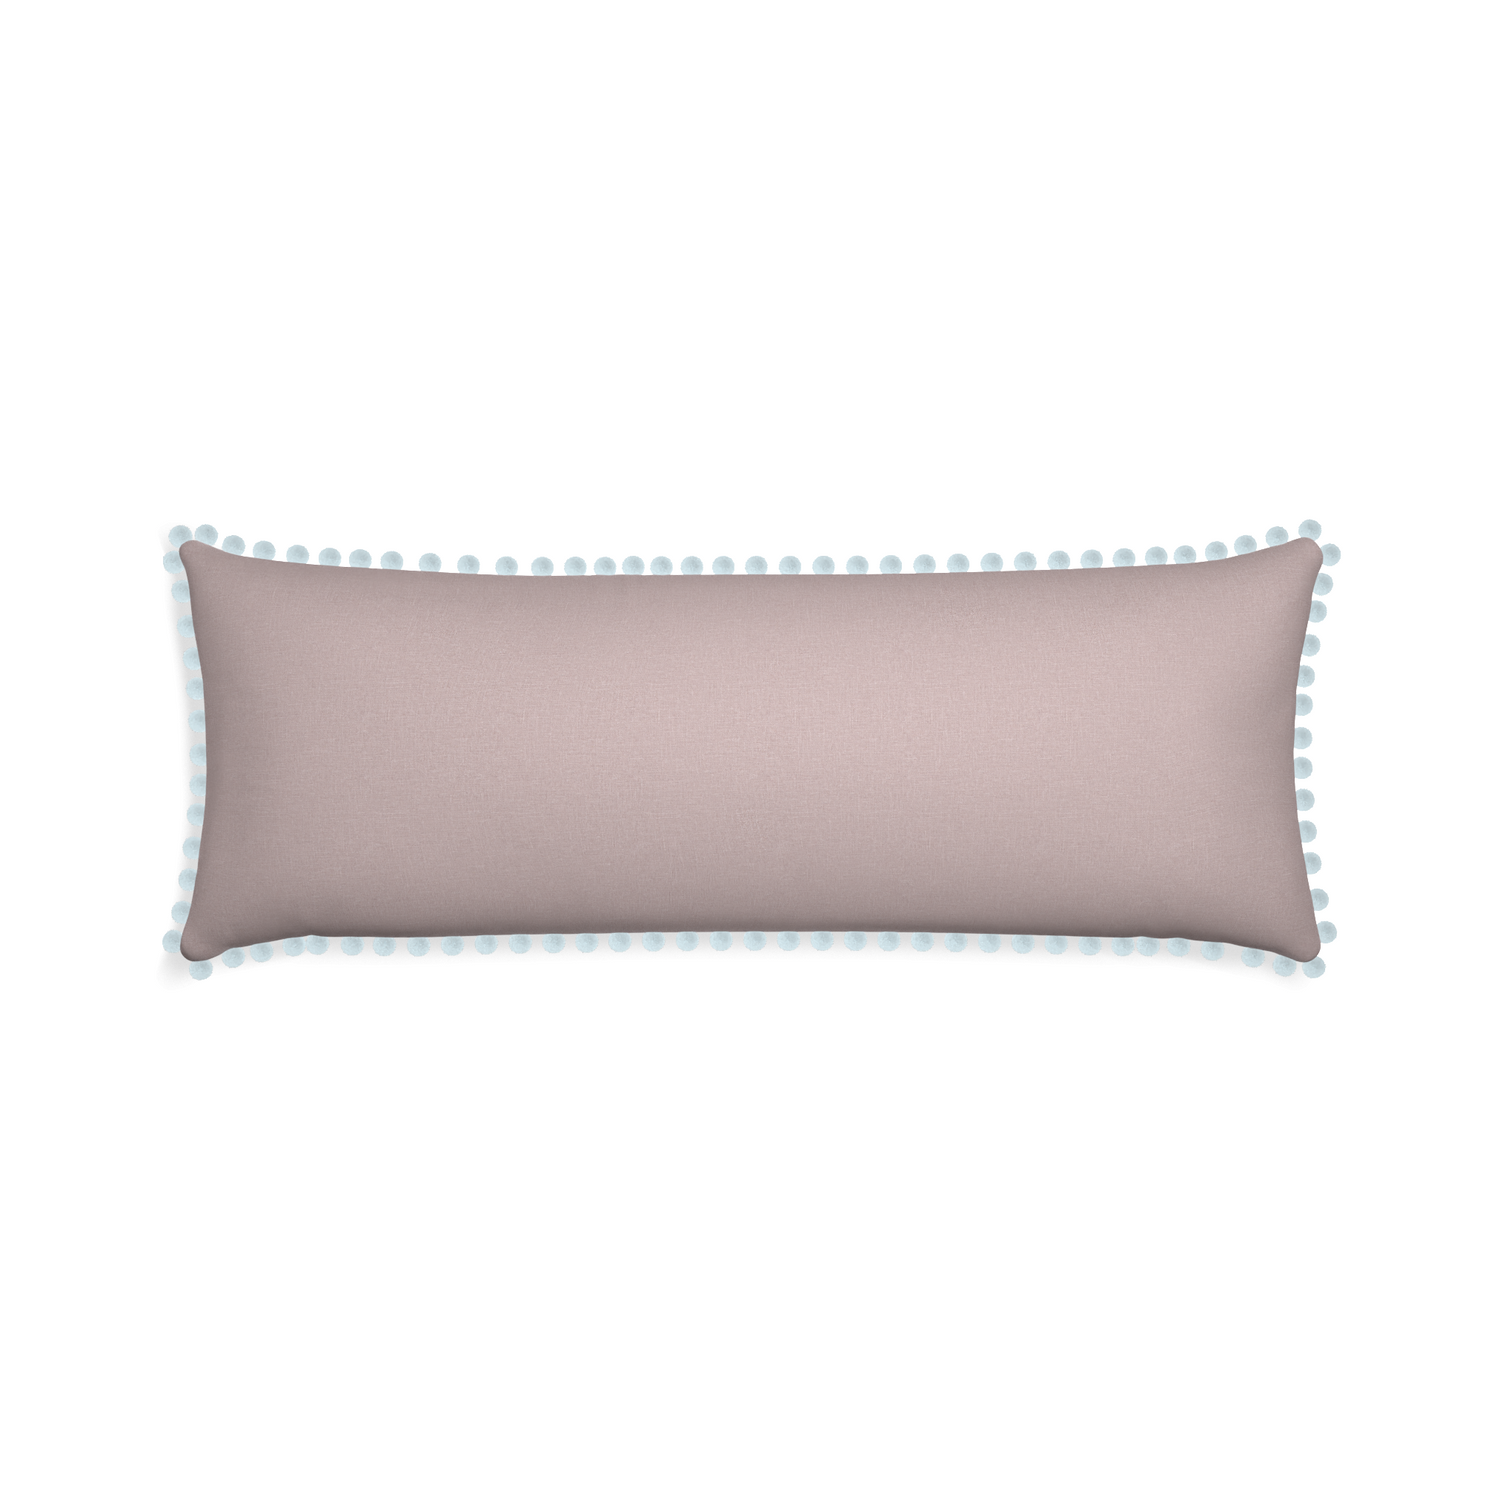 Xl-lumbar orchid custom mauve pinkpillow with powder pom pom on white background